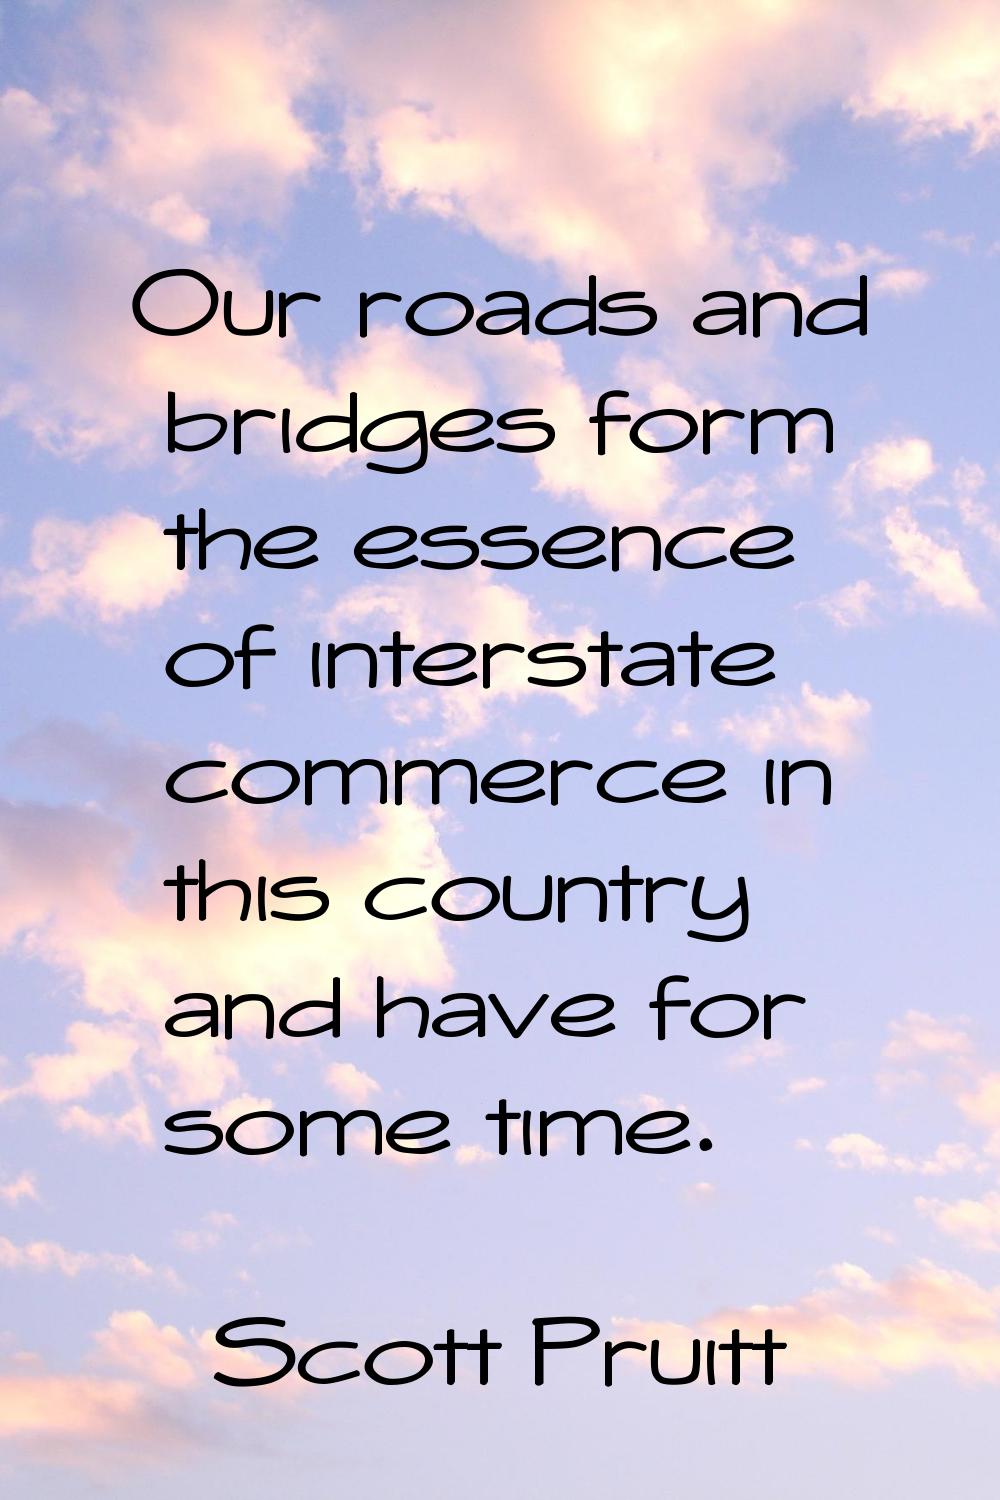 Our roads and bridges form the essence of interstate commerce in this country and have for some tim